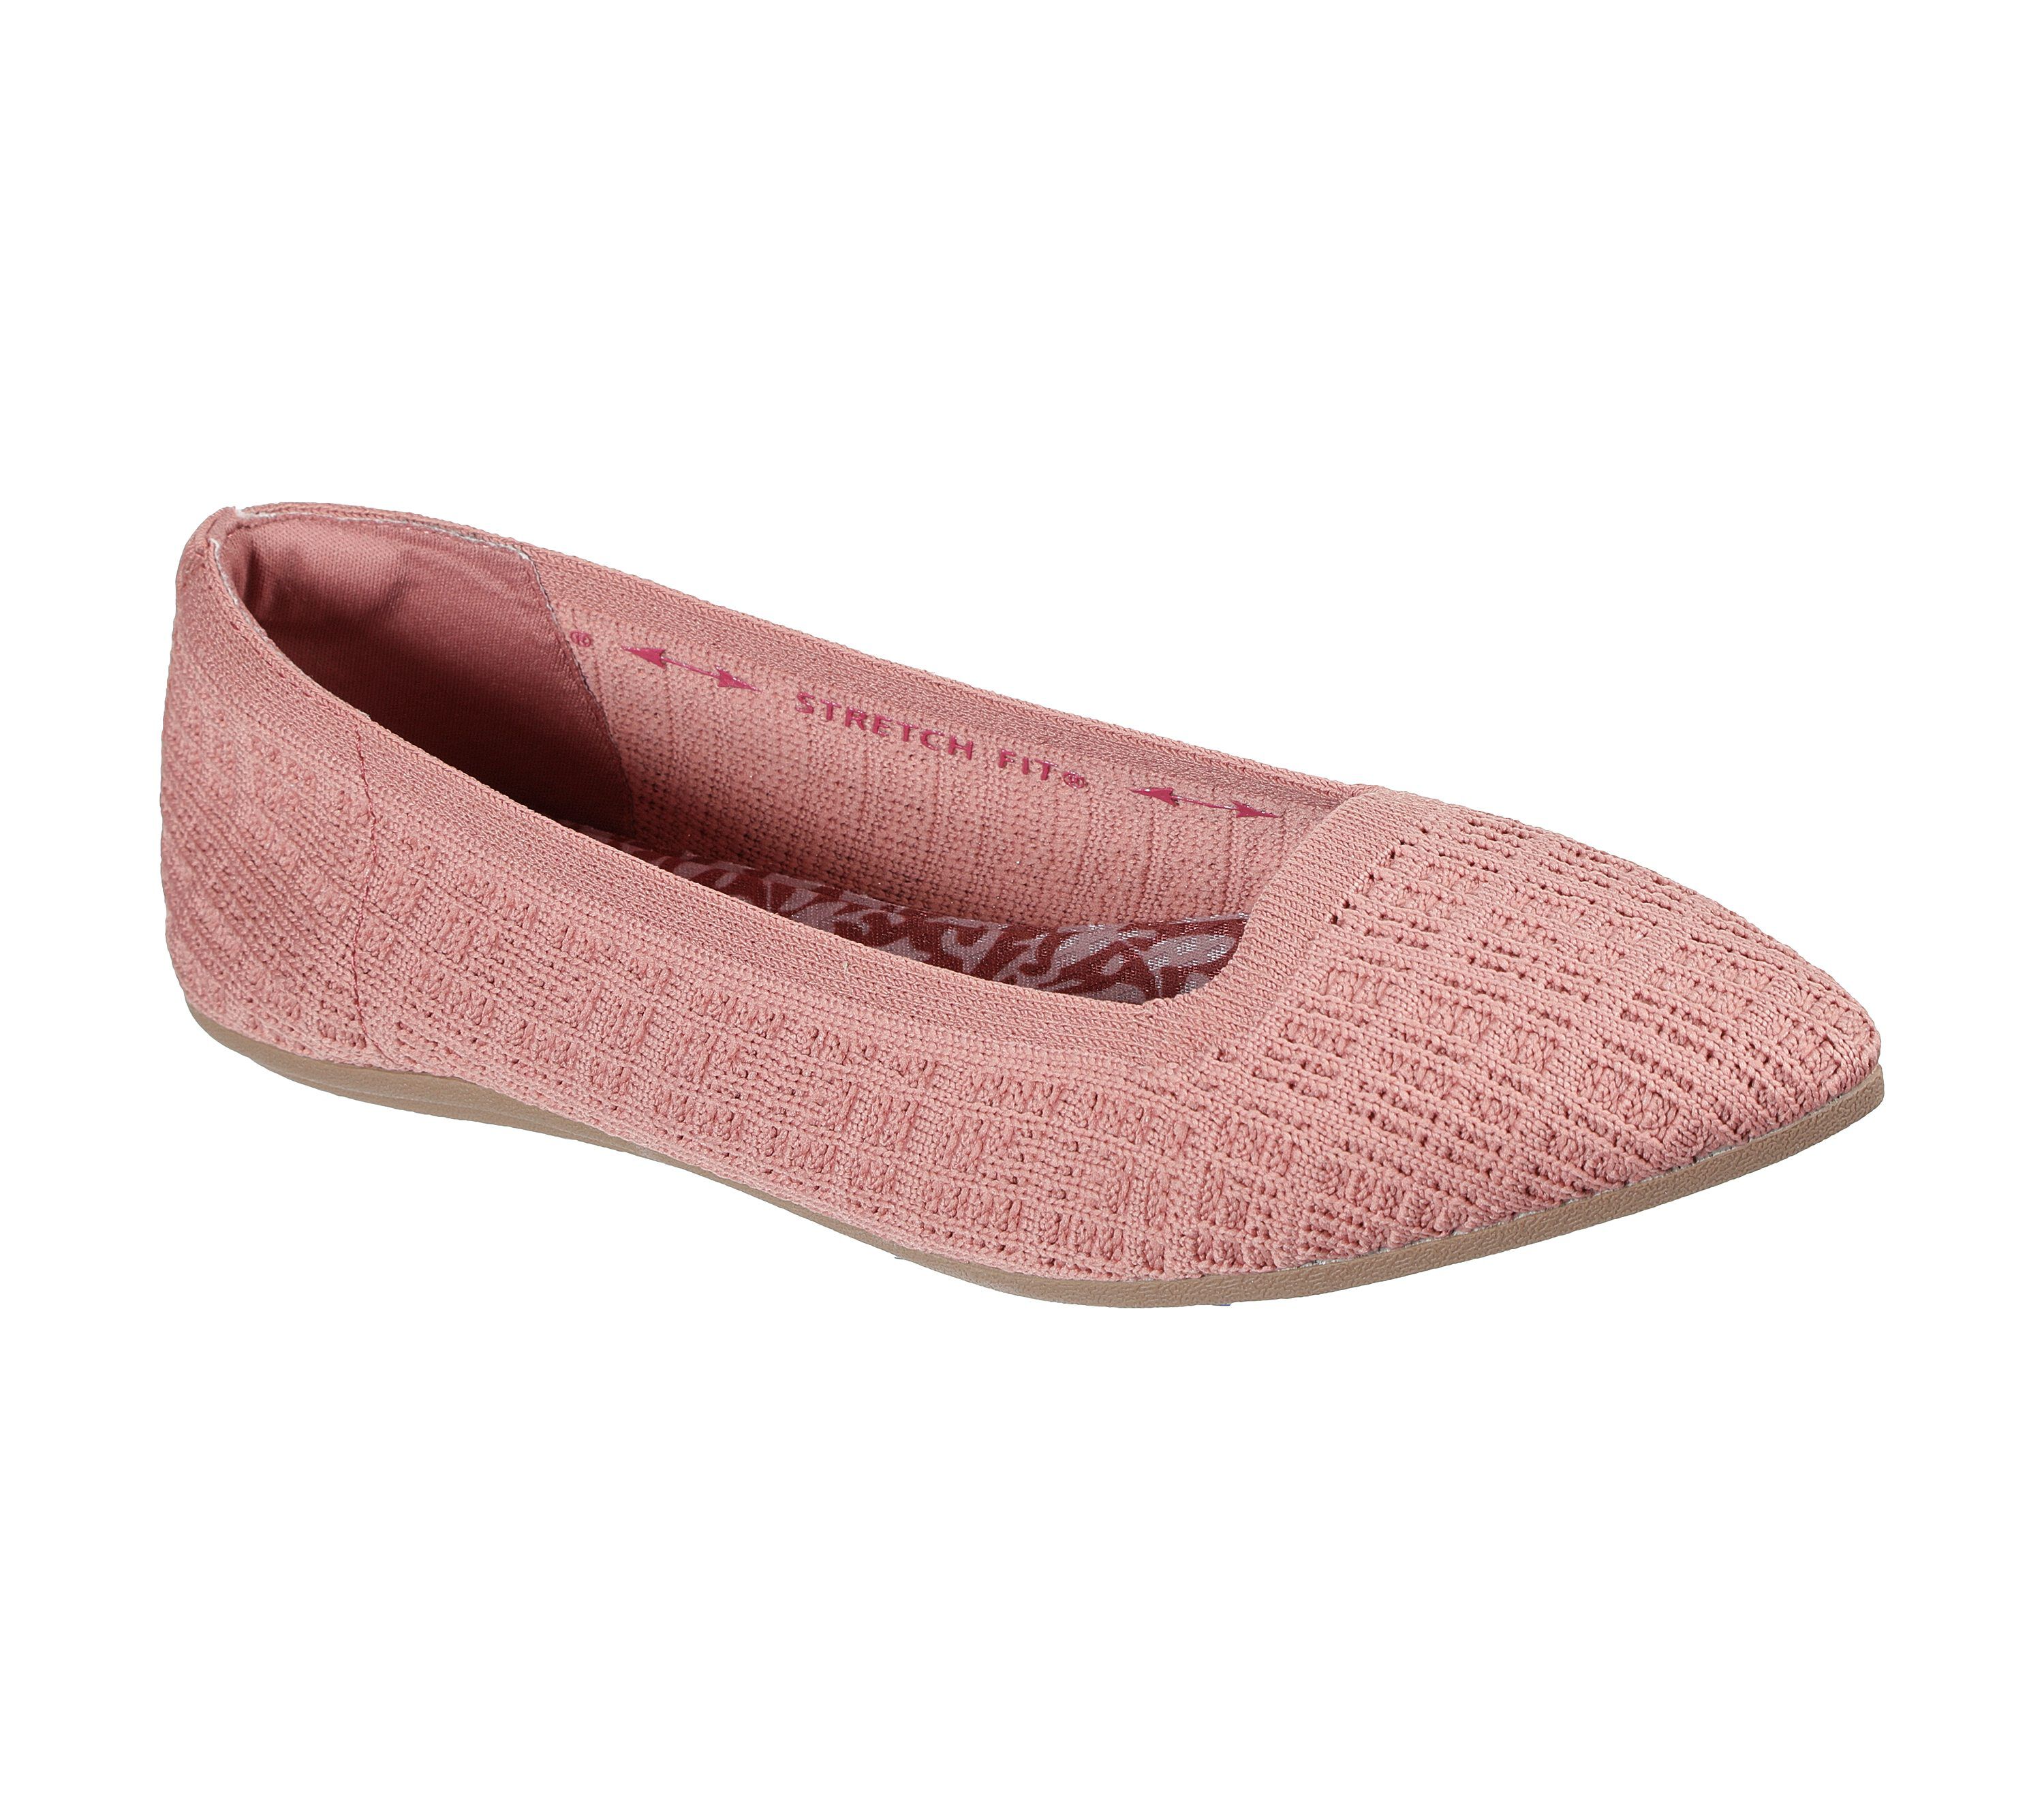 skechers leather flats